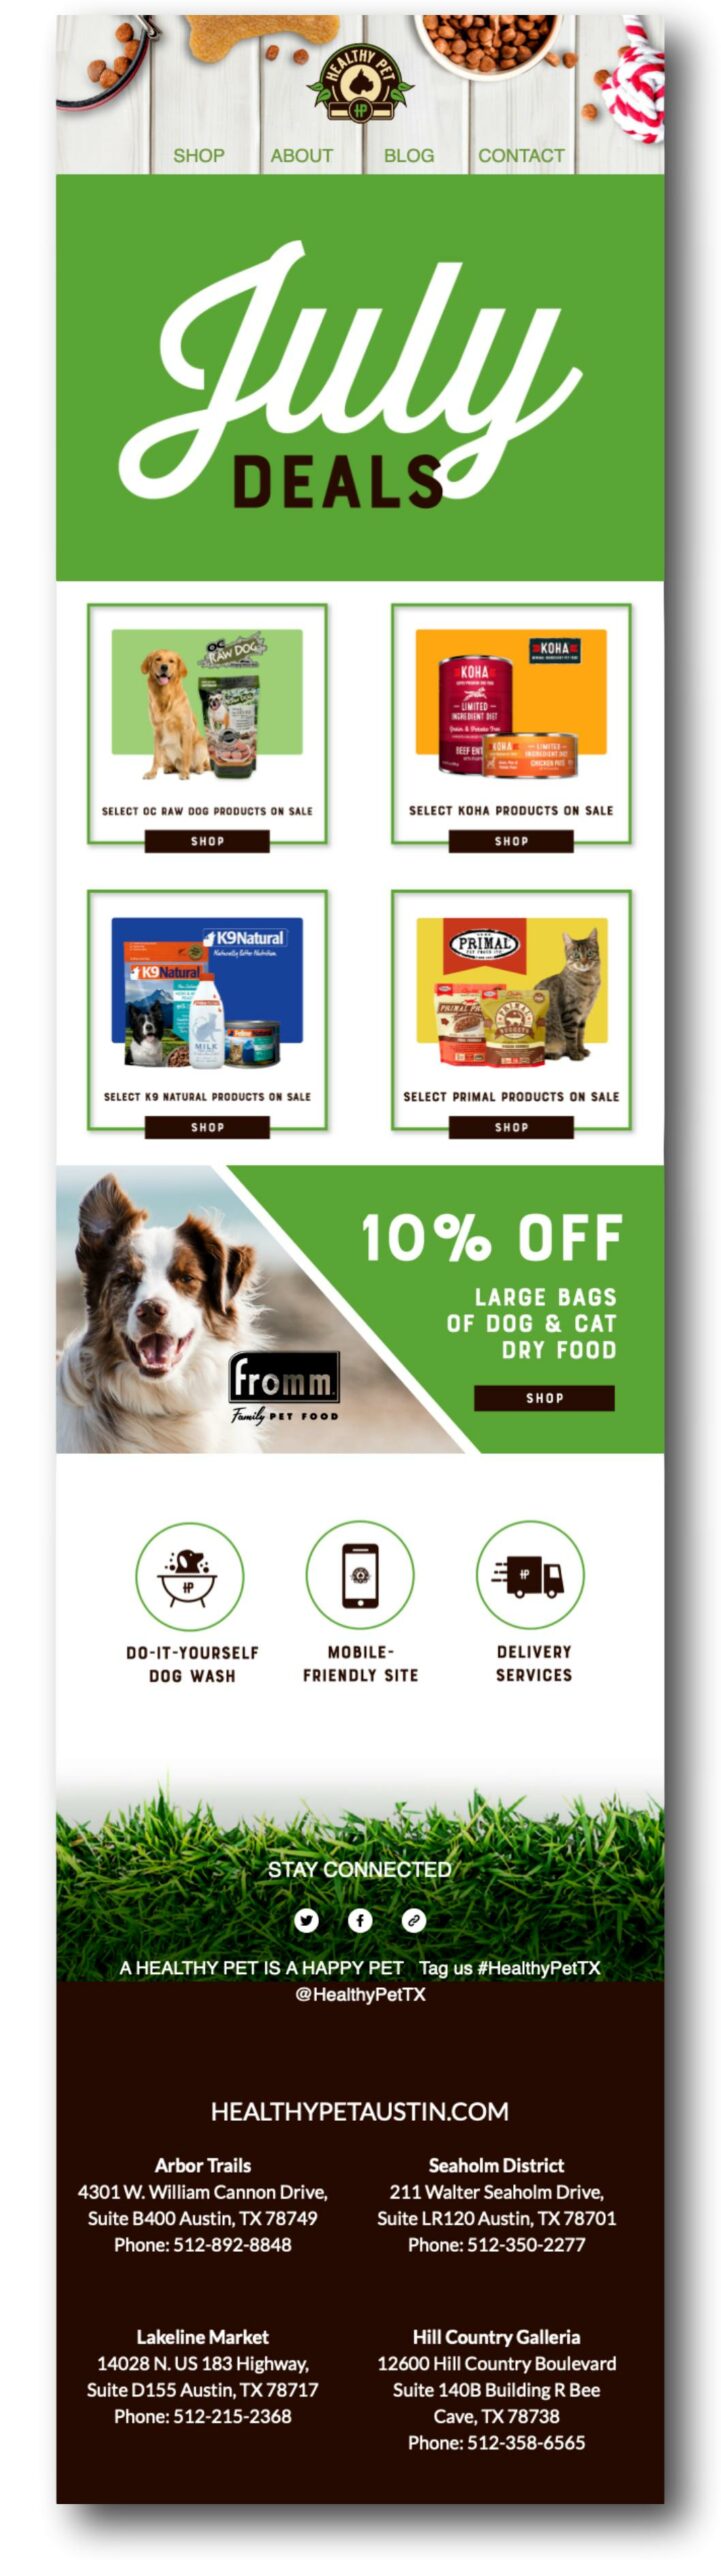 Healthy Pet email marketing